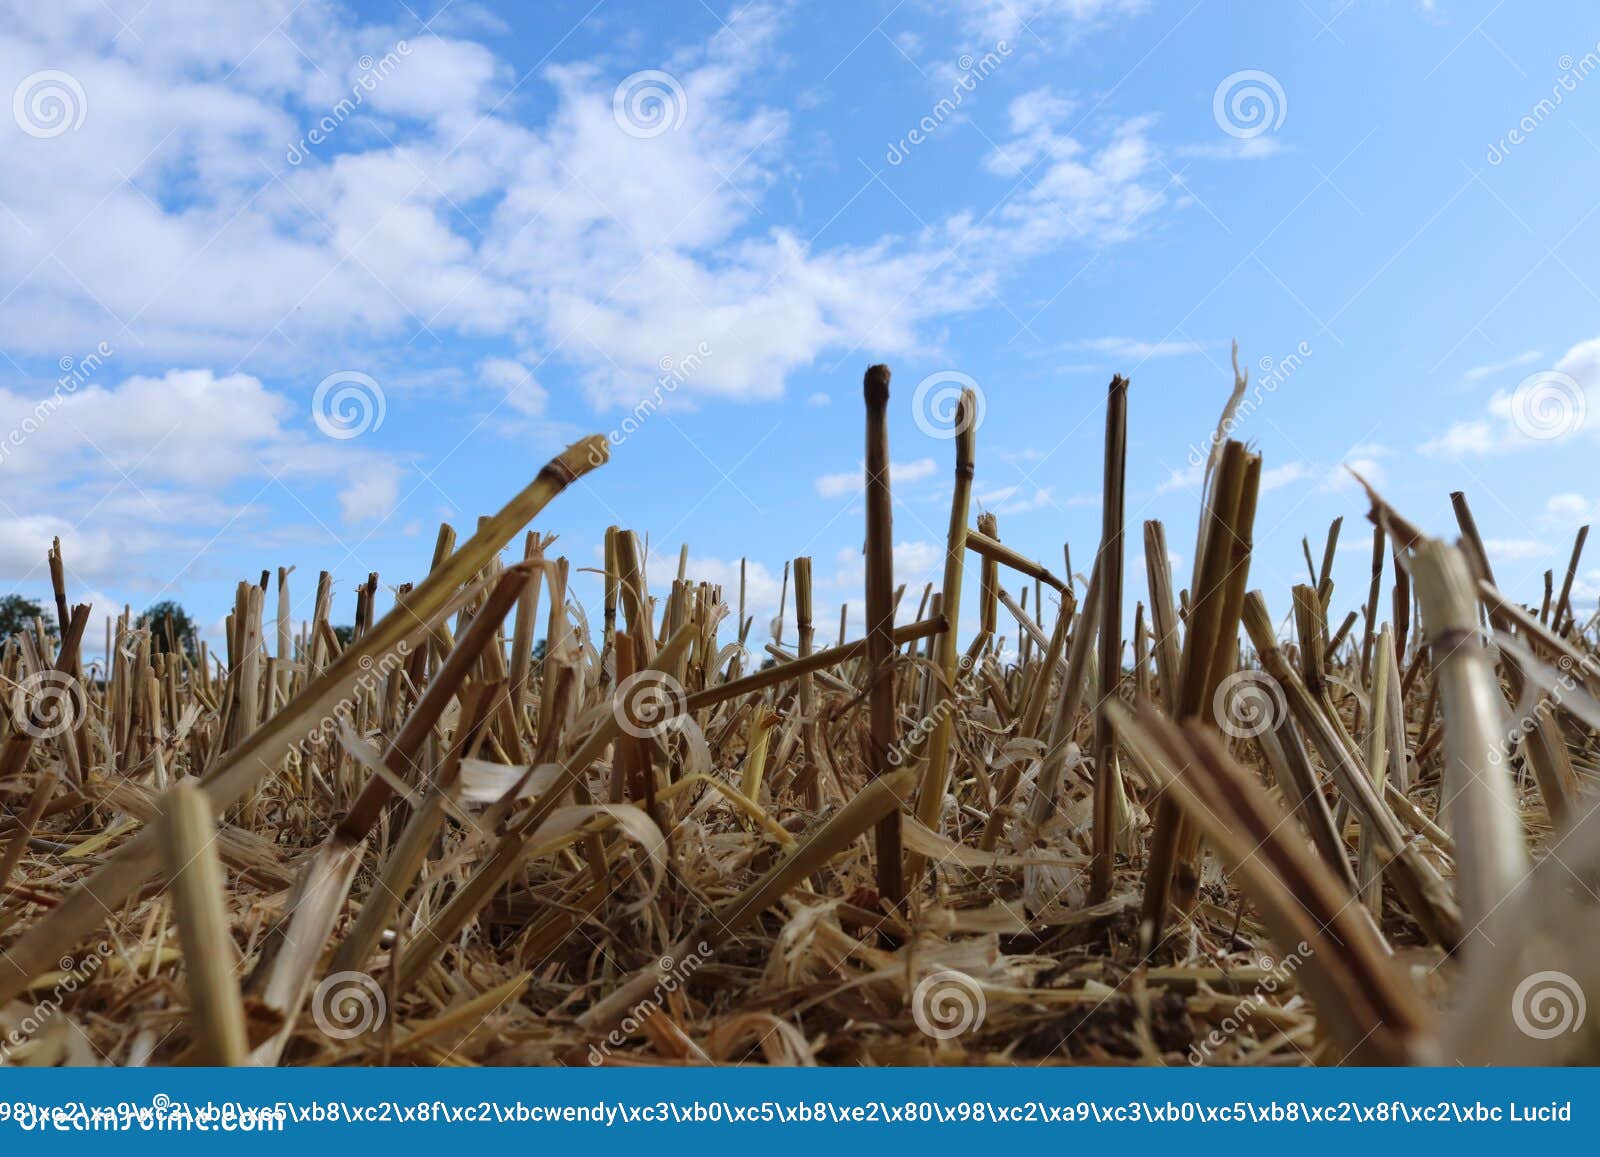 Summer Sun Glowing Down on Field of Cut Straw Stock Photo - Image of ...